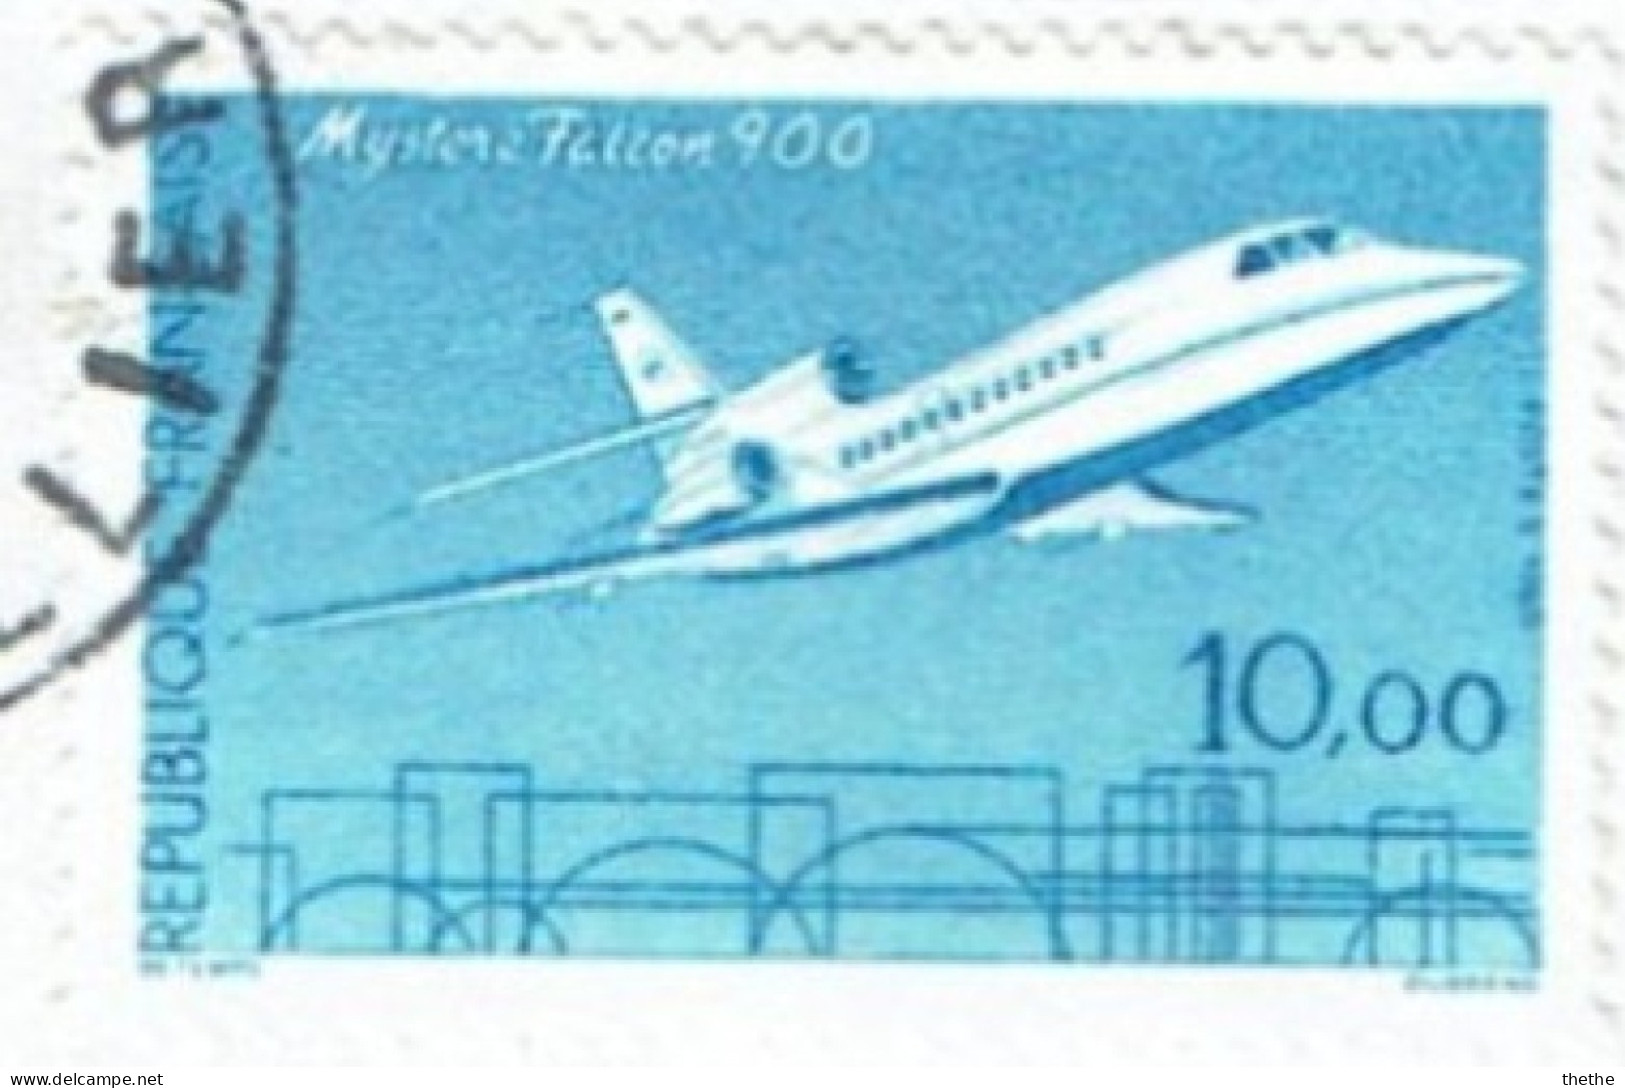 FRANCE - Principales Réalisations : Mystere Falcon 900 - Used Stamps